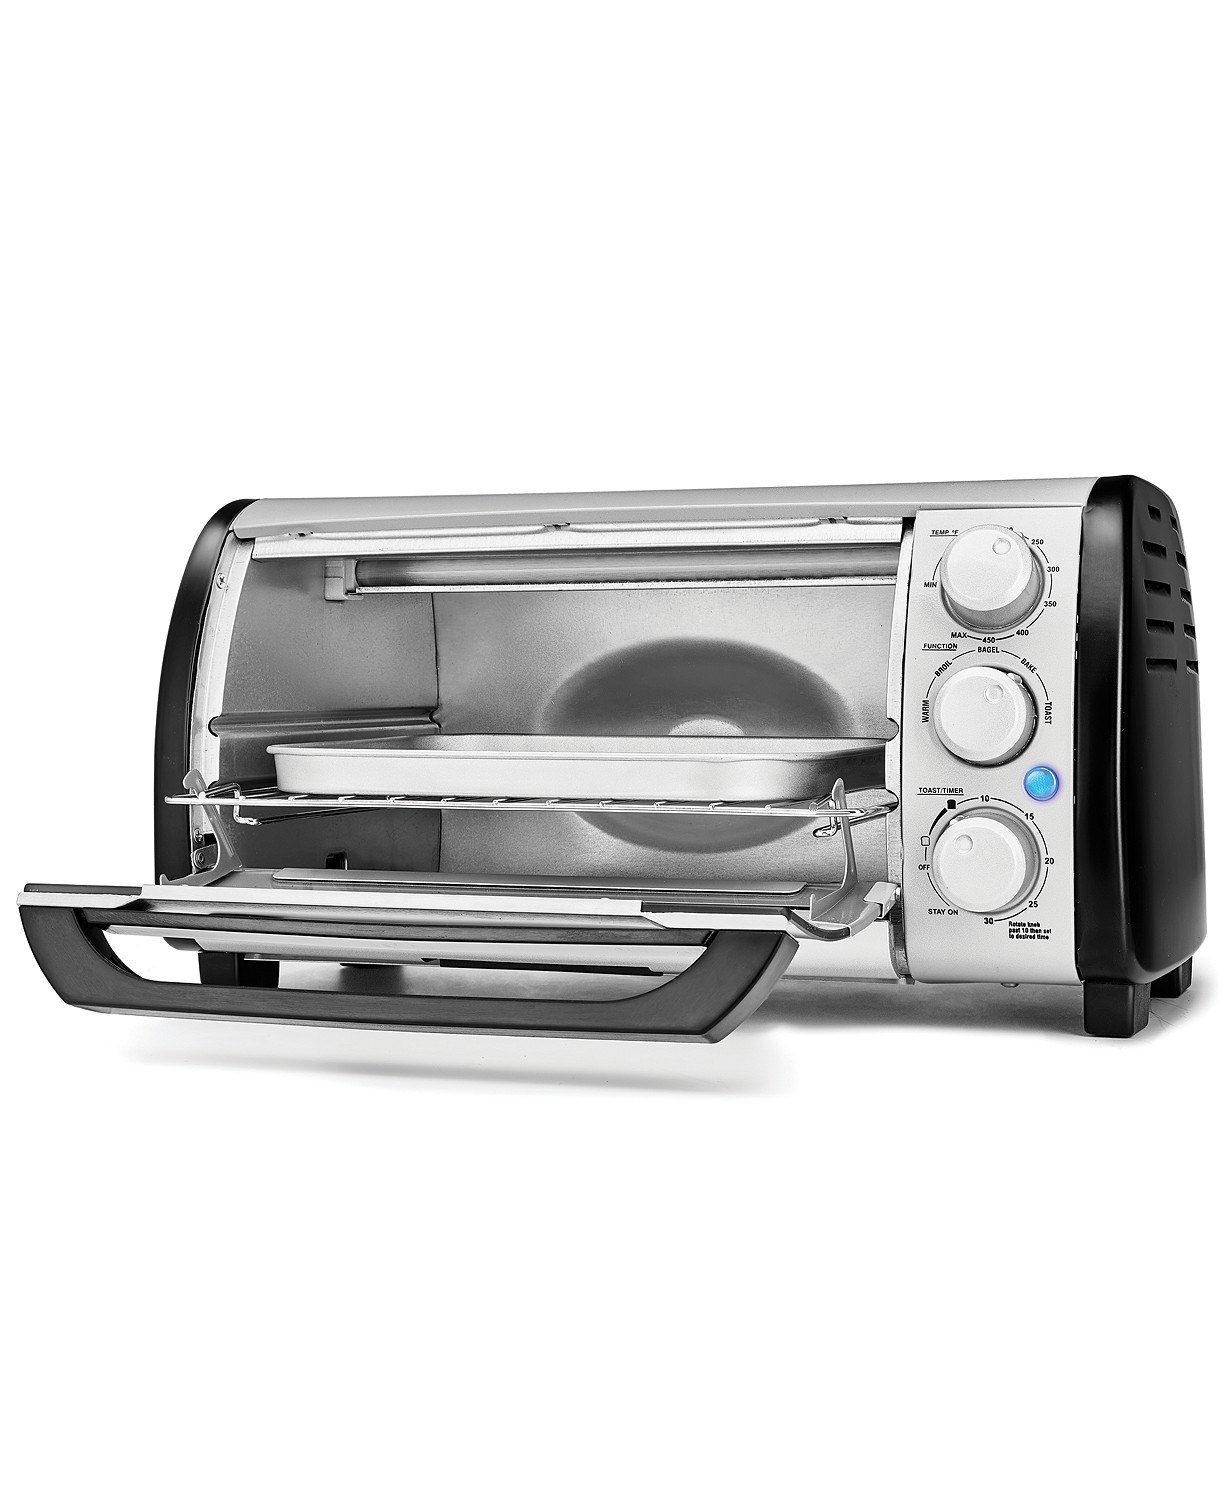 macy-s-bella-small-kitchen-appliances-only-7-99-after-rebate-panini